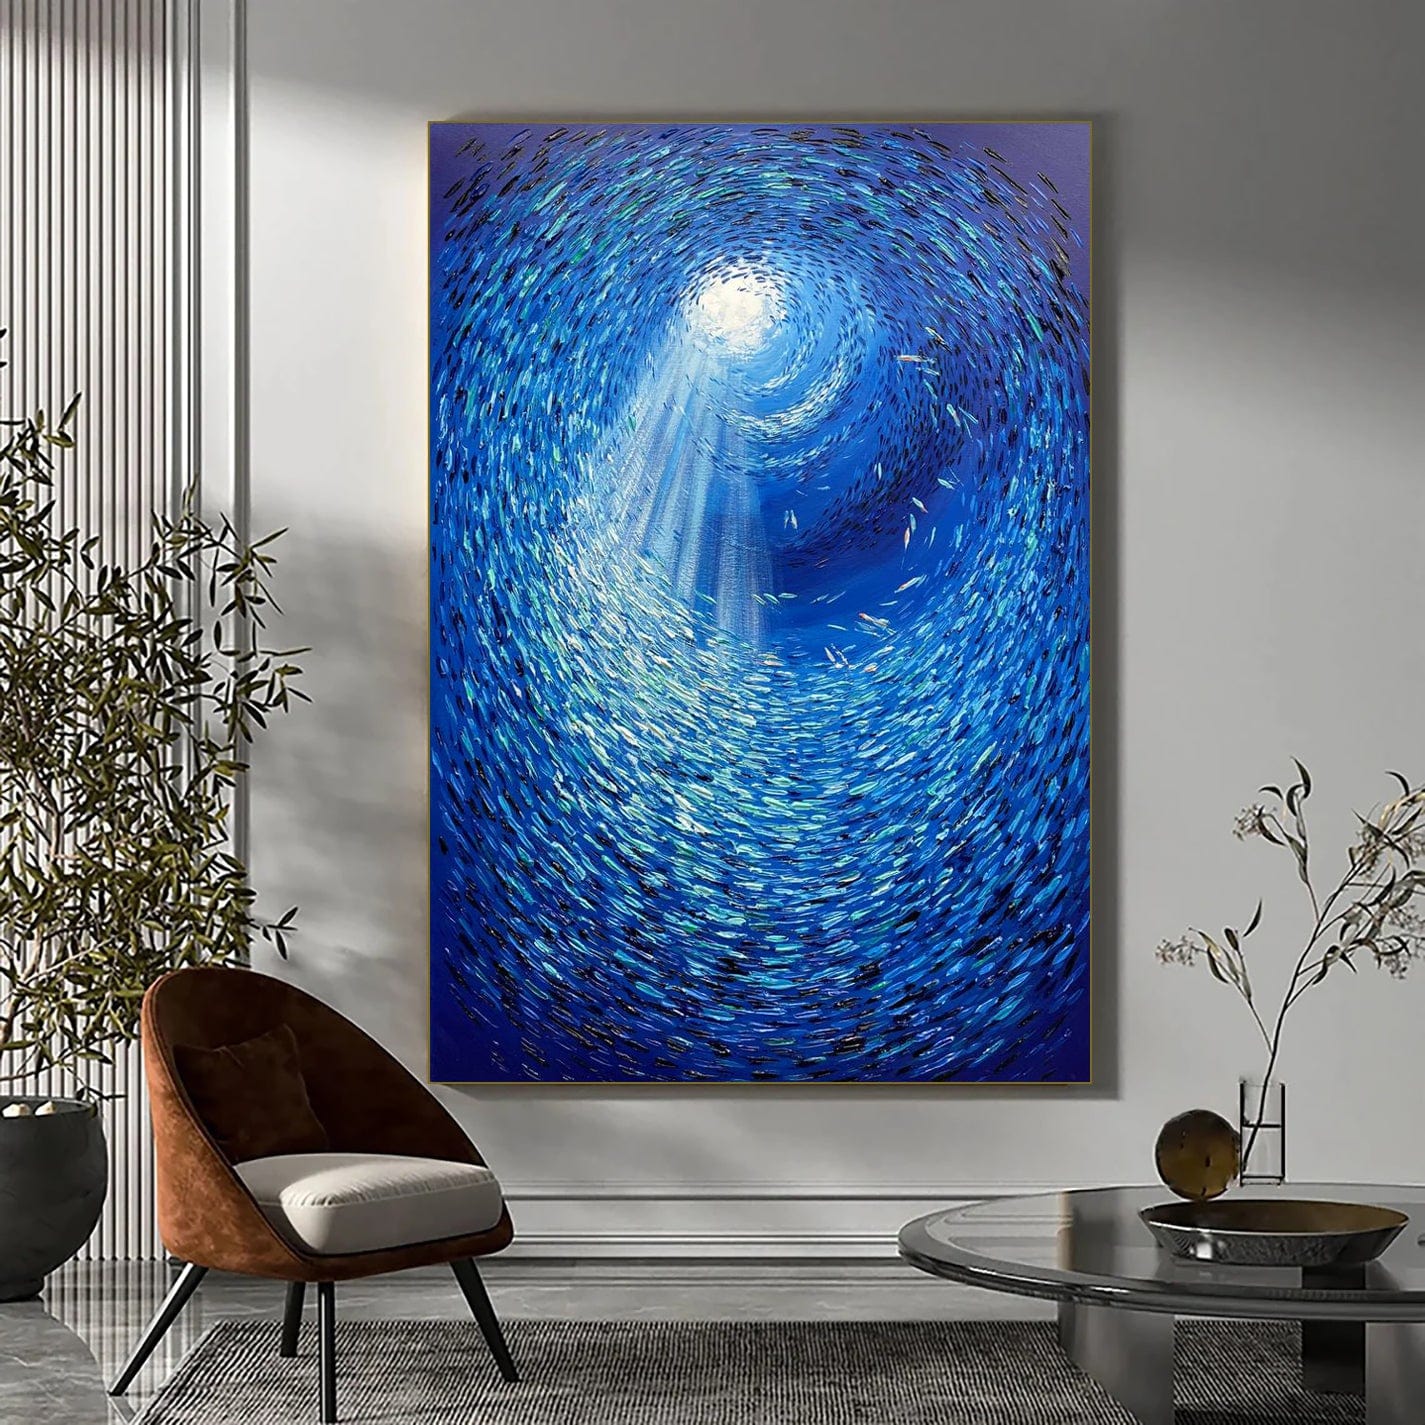 Abstract Fish Painting On Canvas Original Marine Artwork Blue Textured Wall  Art for Office Decor